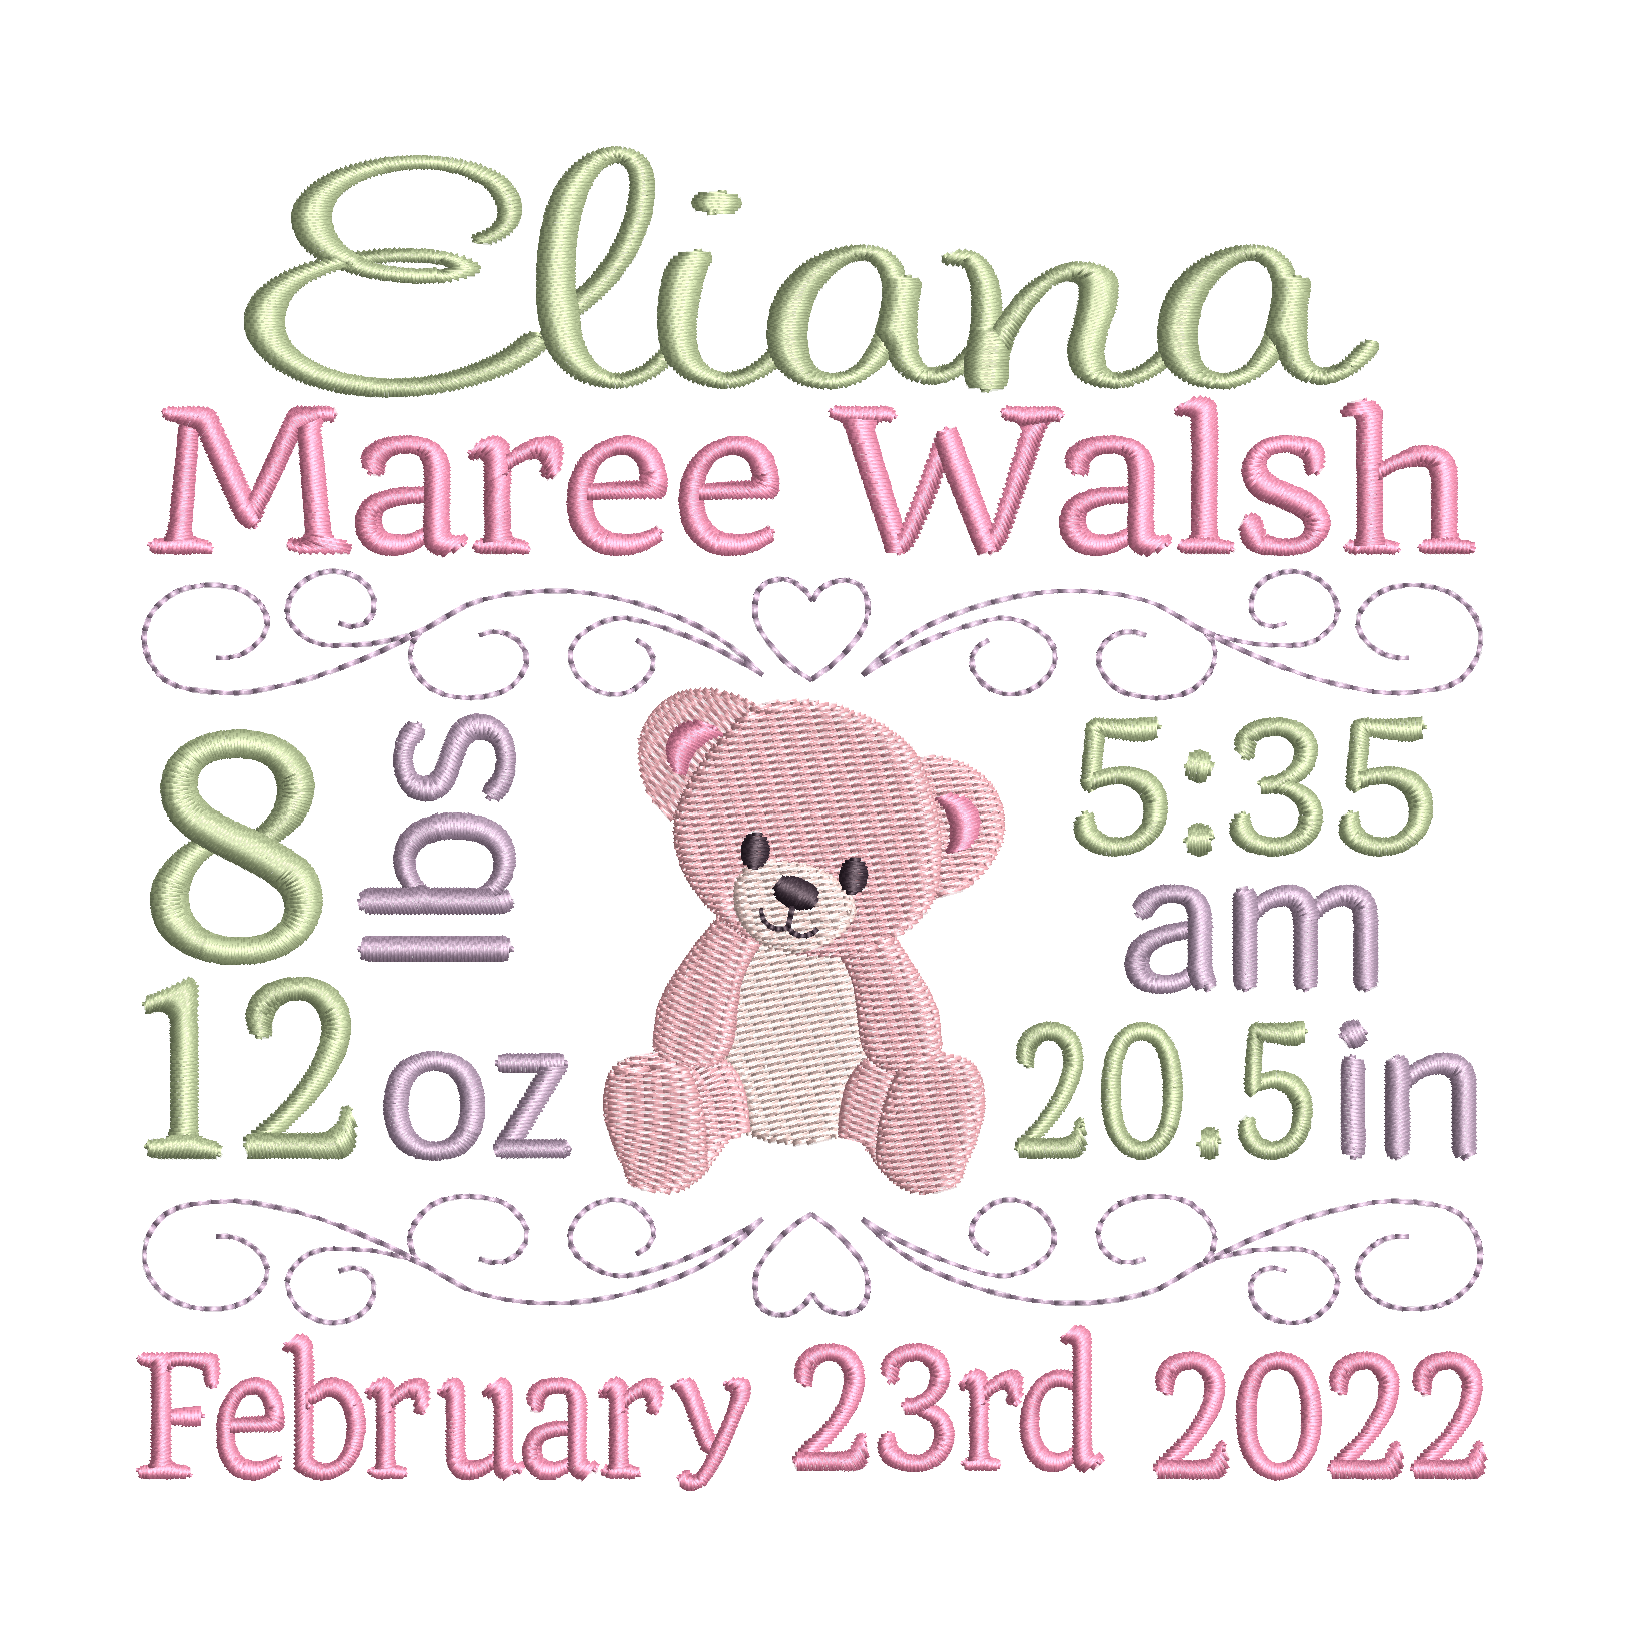 Baby Birth Announcement Machine Embroidery Design by rosiedayembroidery.com